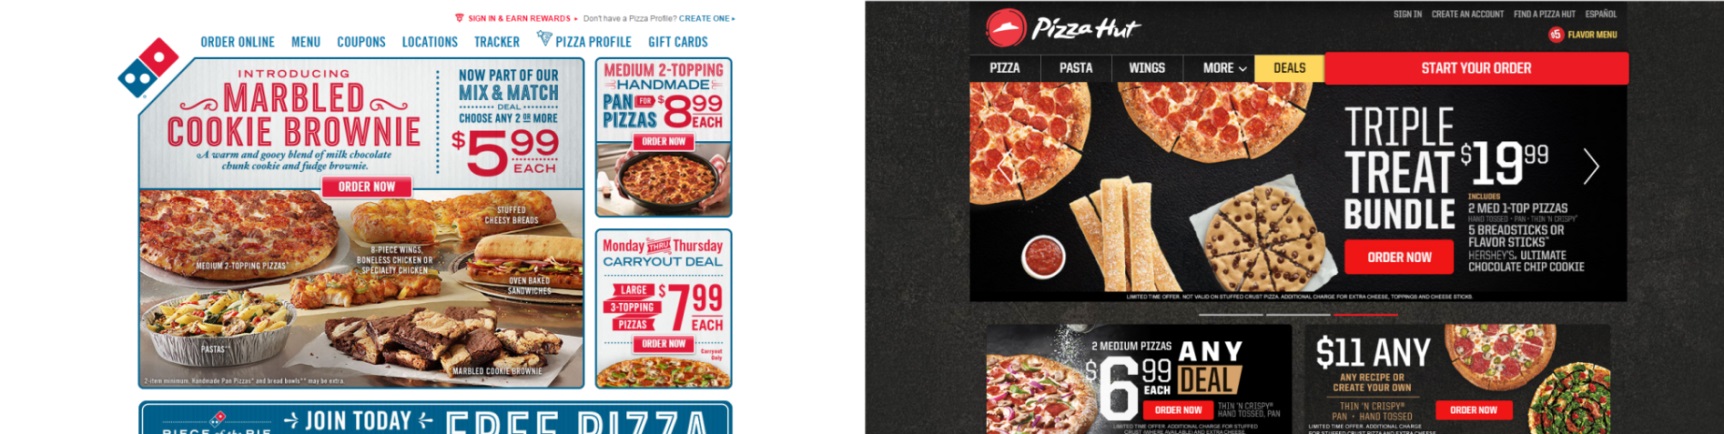 Dominos and Pizza Hut home pages